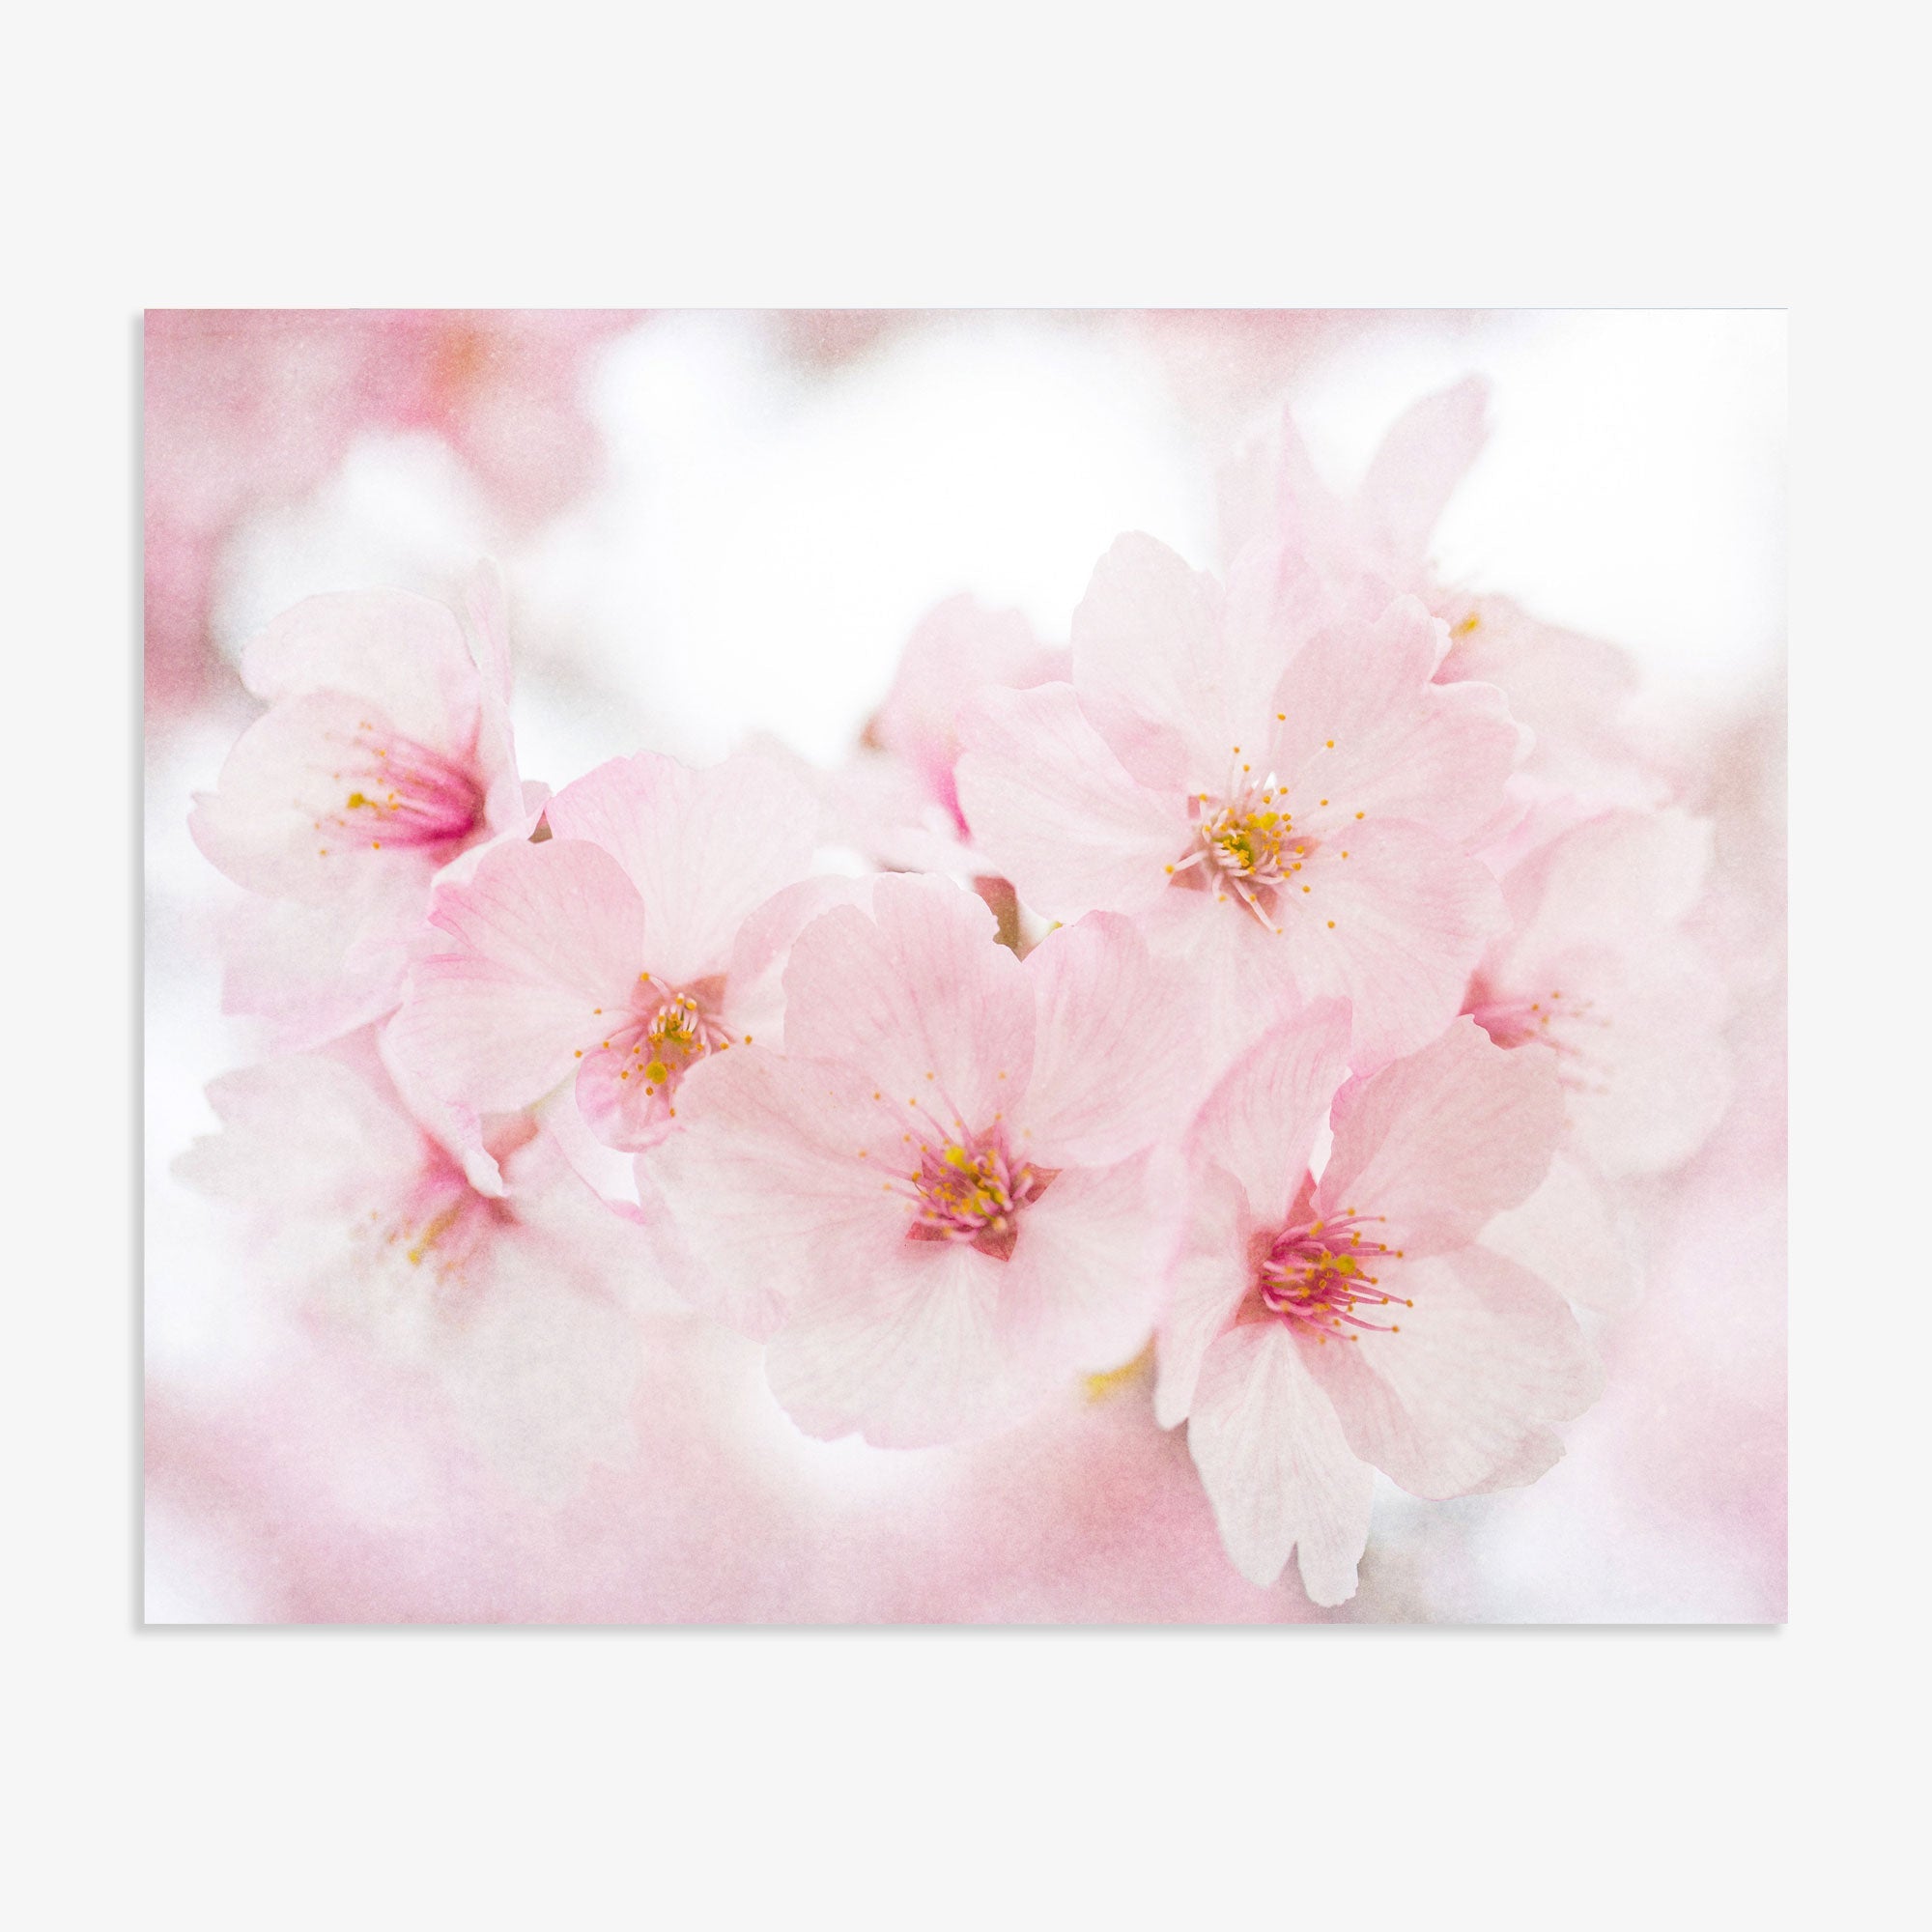 A close-up of delicate pink cherry blossoms on archival photographic paper, with a soft, blurred background, capturing the gentle texture and subtle coloring of the &#39;Cherry Blossom&#39; Pink Flower Print by Offley Green.